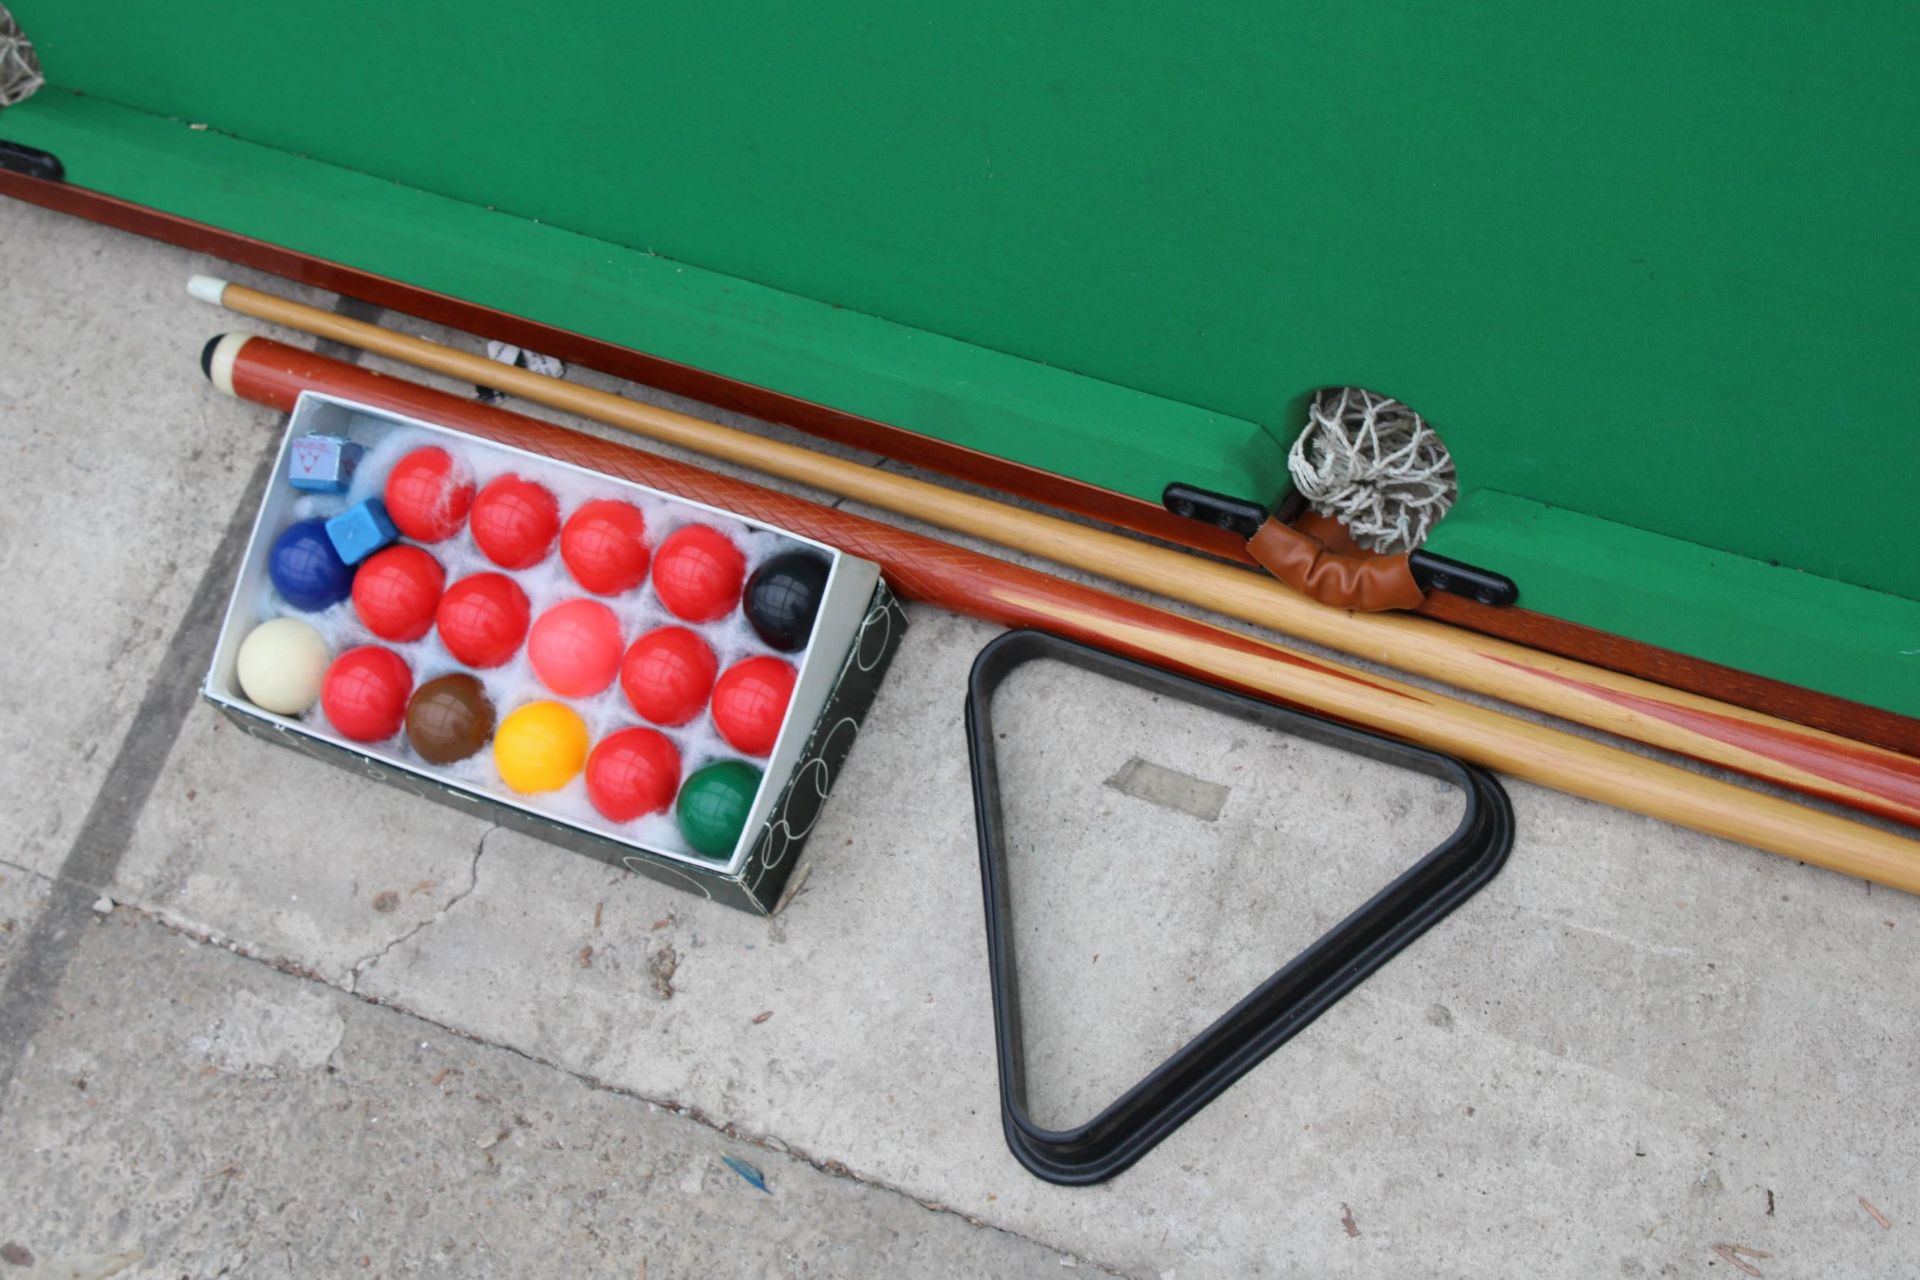 A TABLE TOP POOL TABLE, CUES AND BALLS ETC - Image 2 of 3